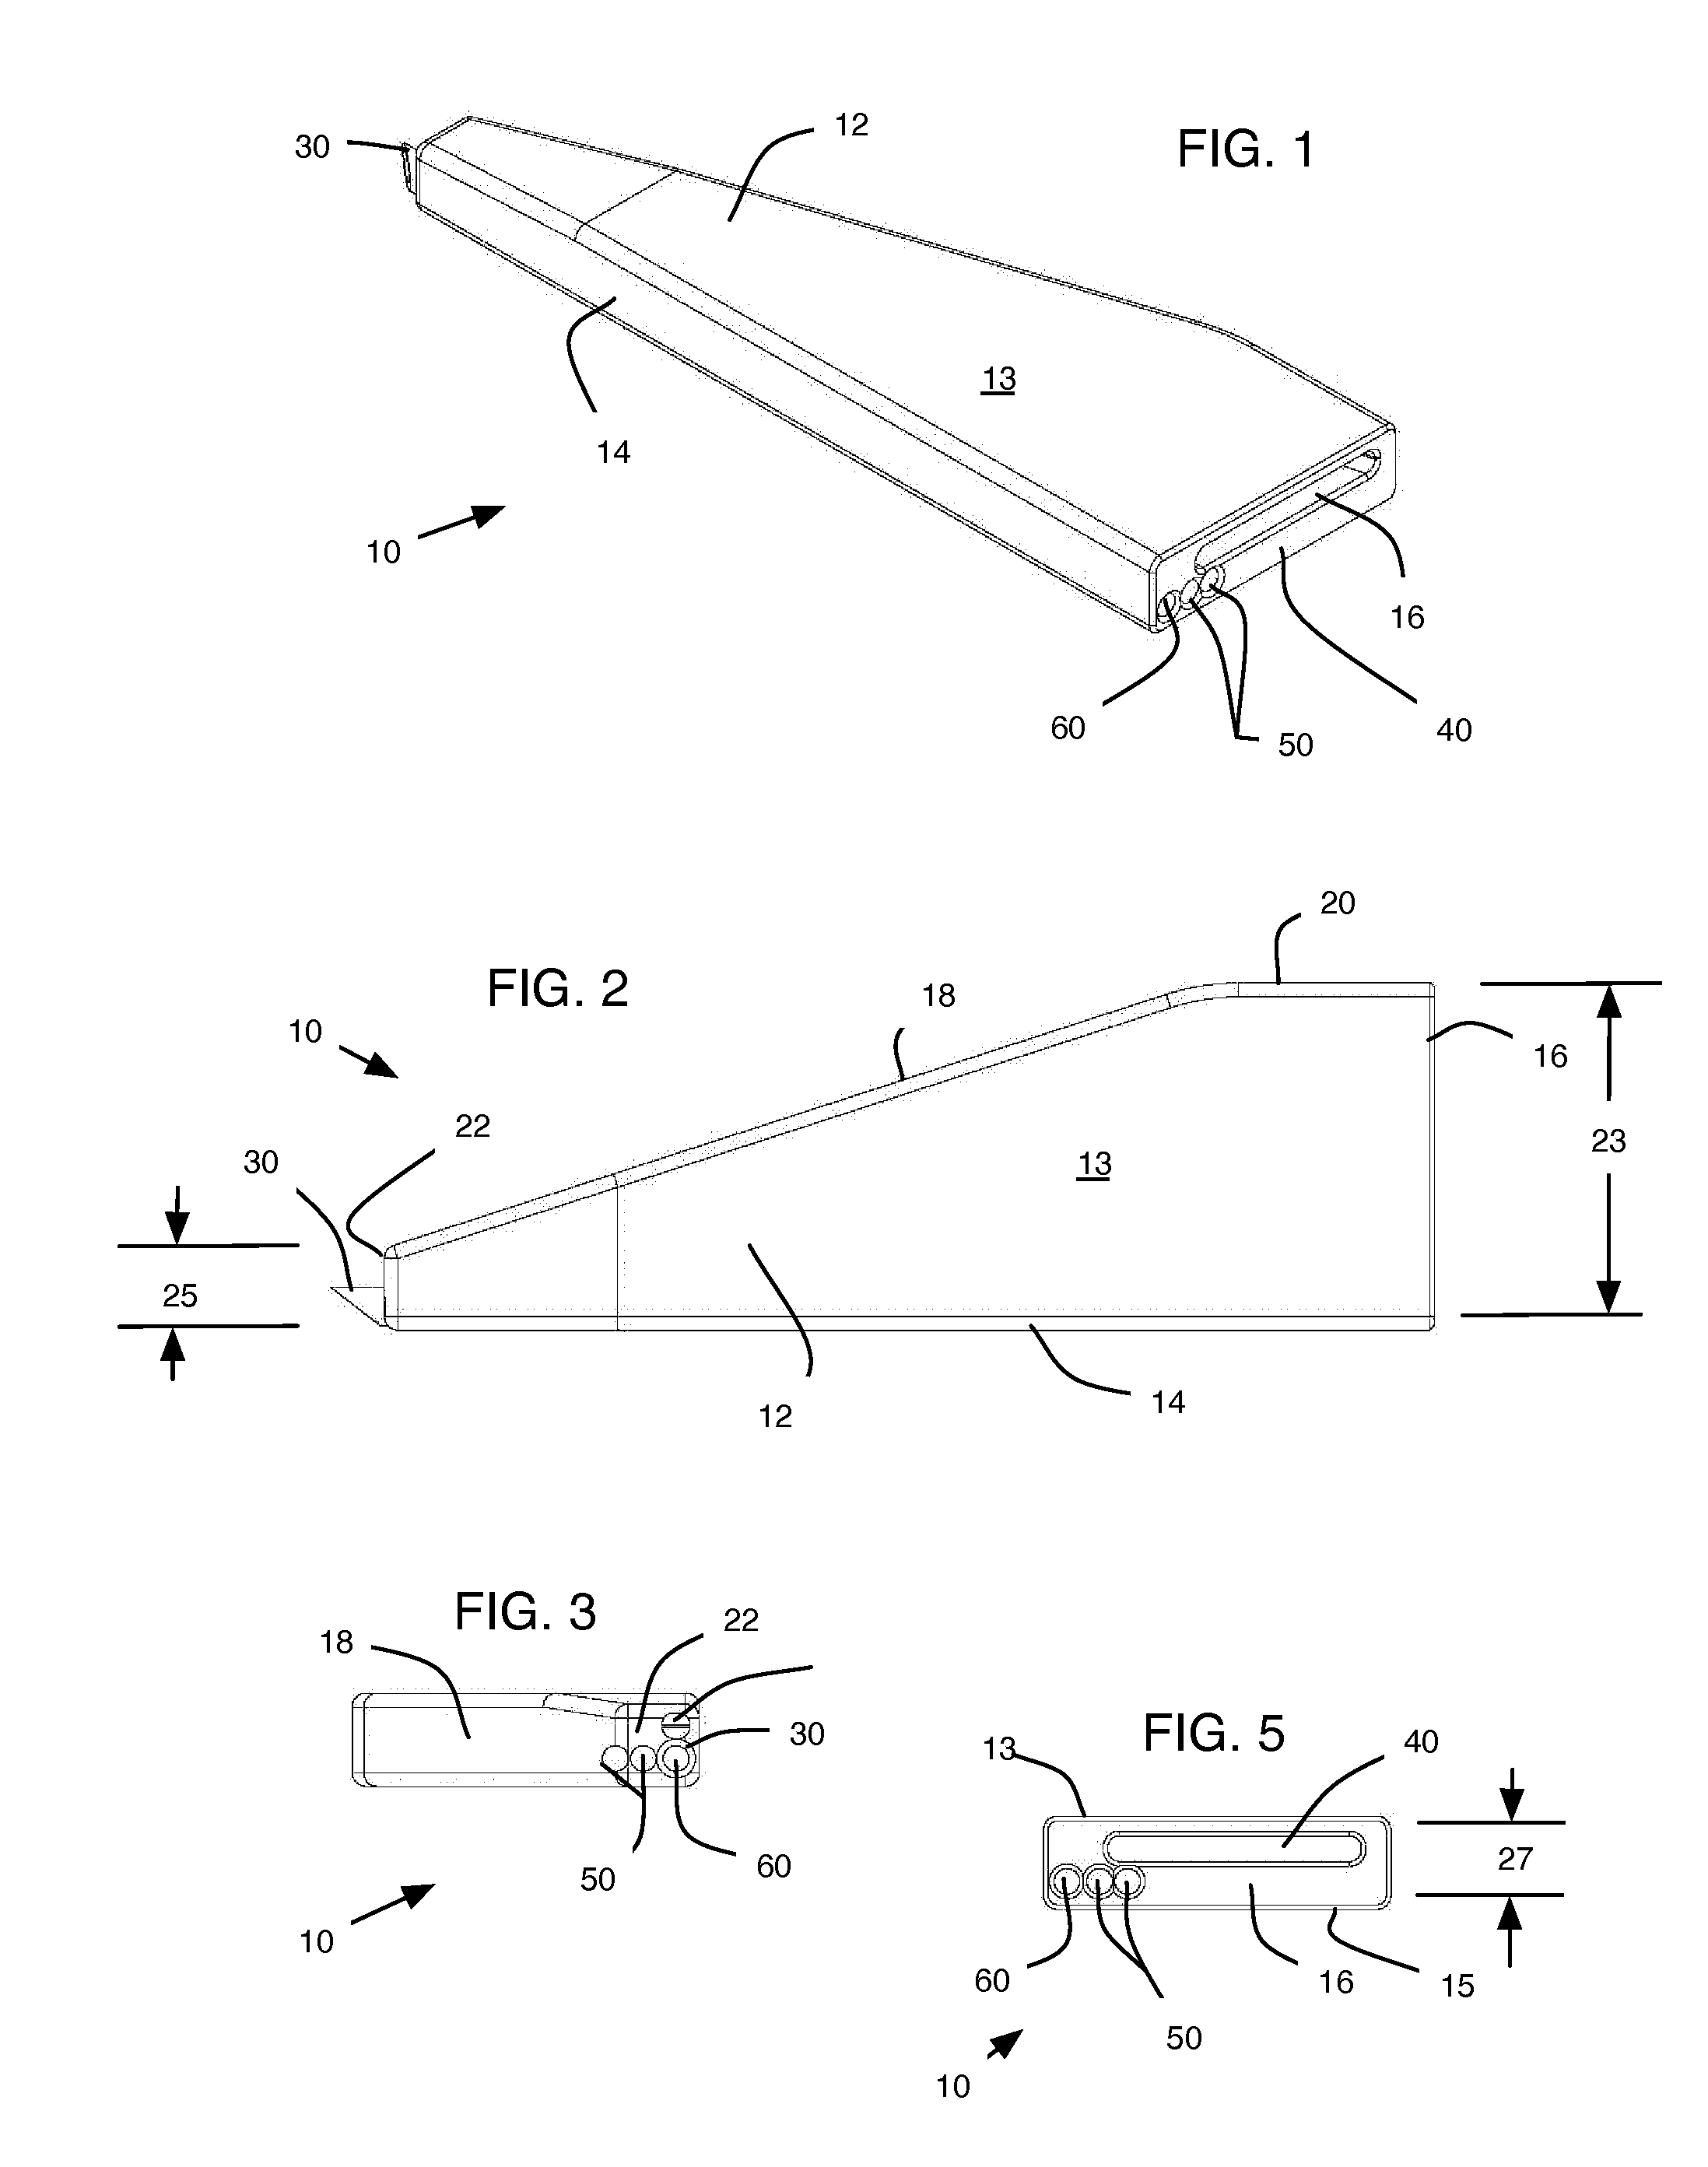 Guide for Surgical Wires, Method, System, and Device